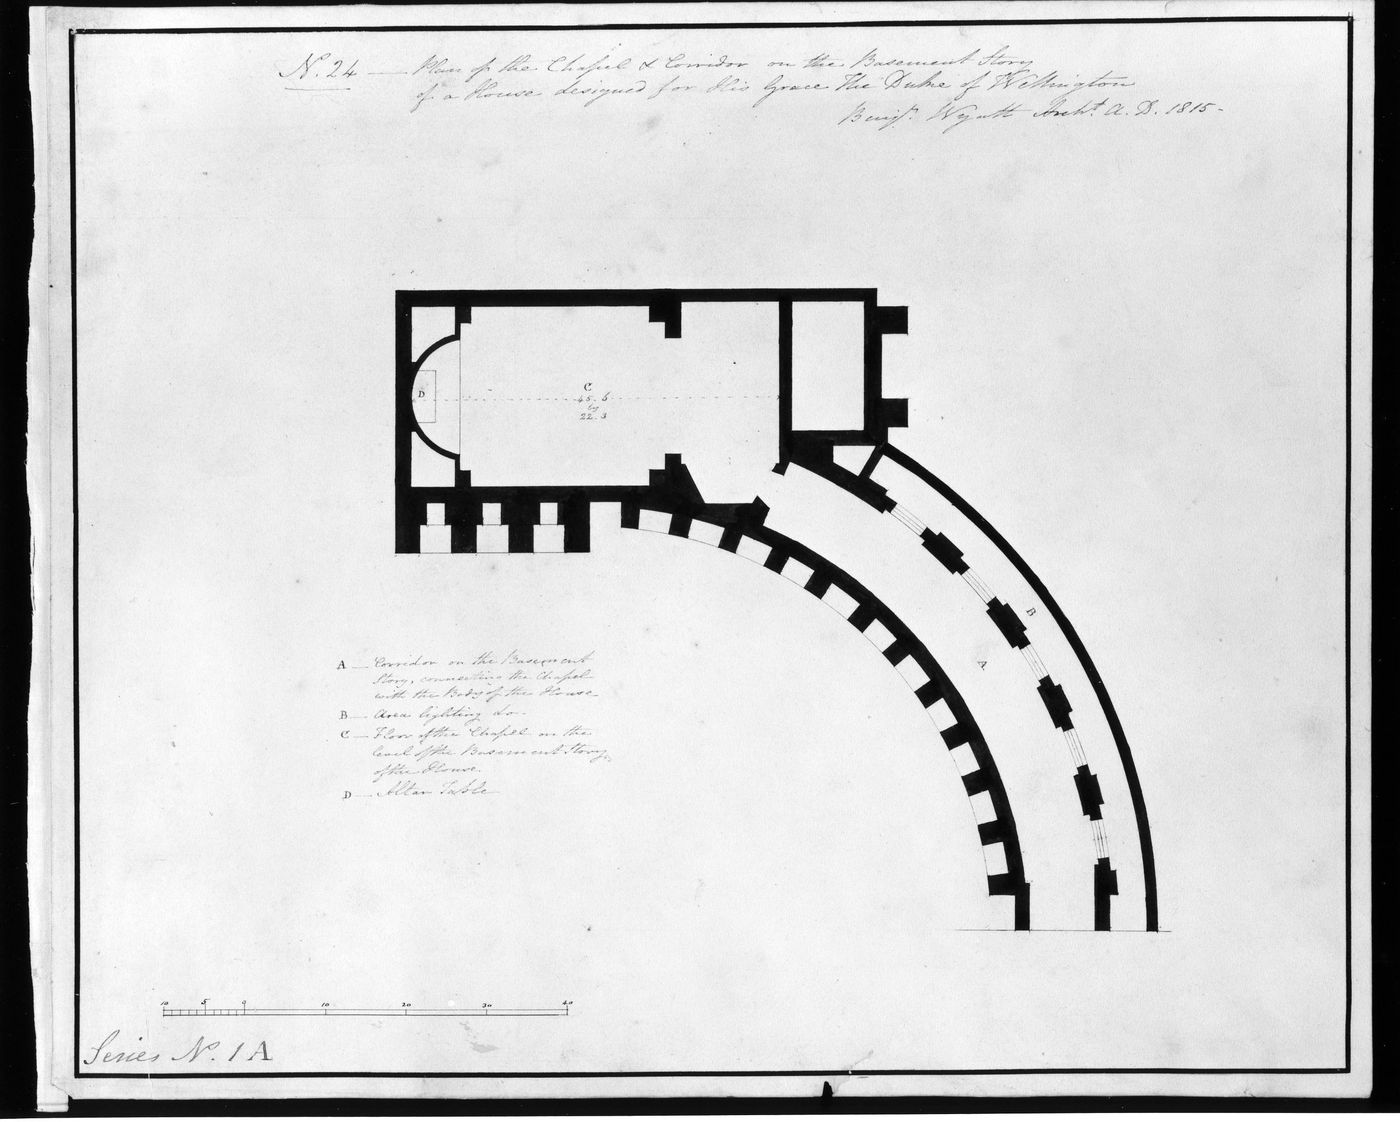 Plan of the chapel and corridor on the basement storey of the stable wing, Waterloo Palace (Series 1A)